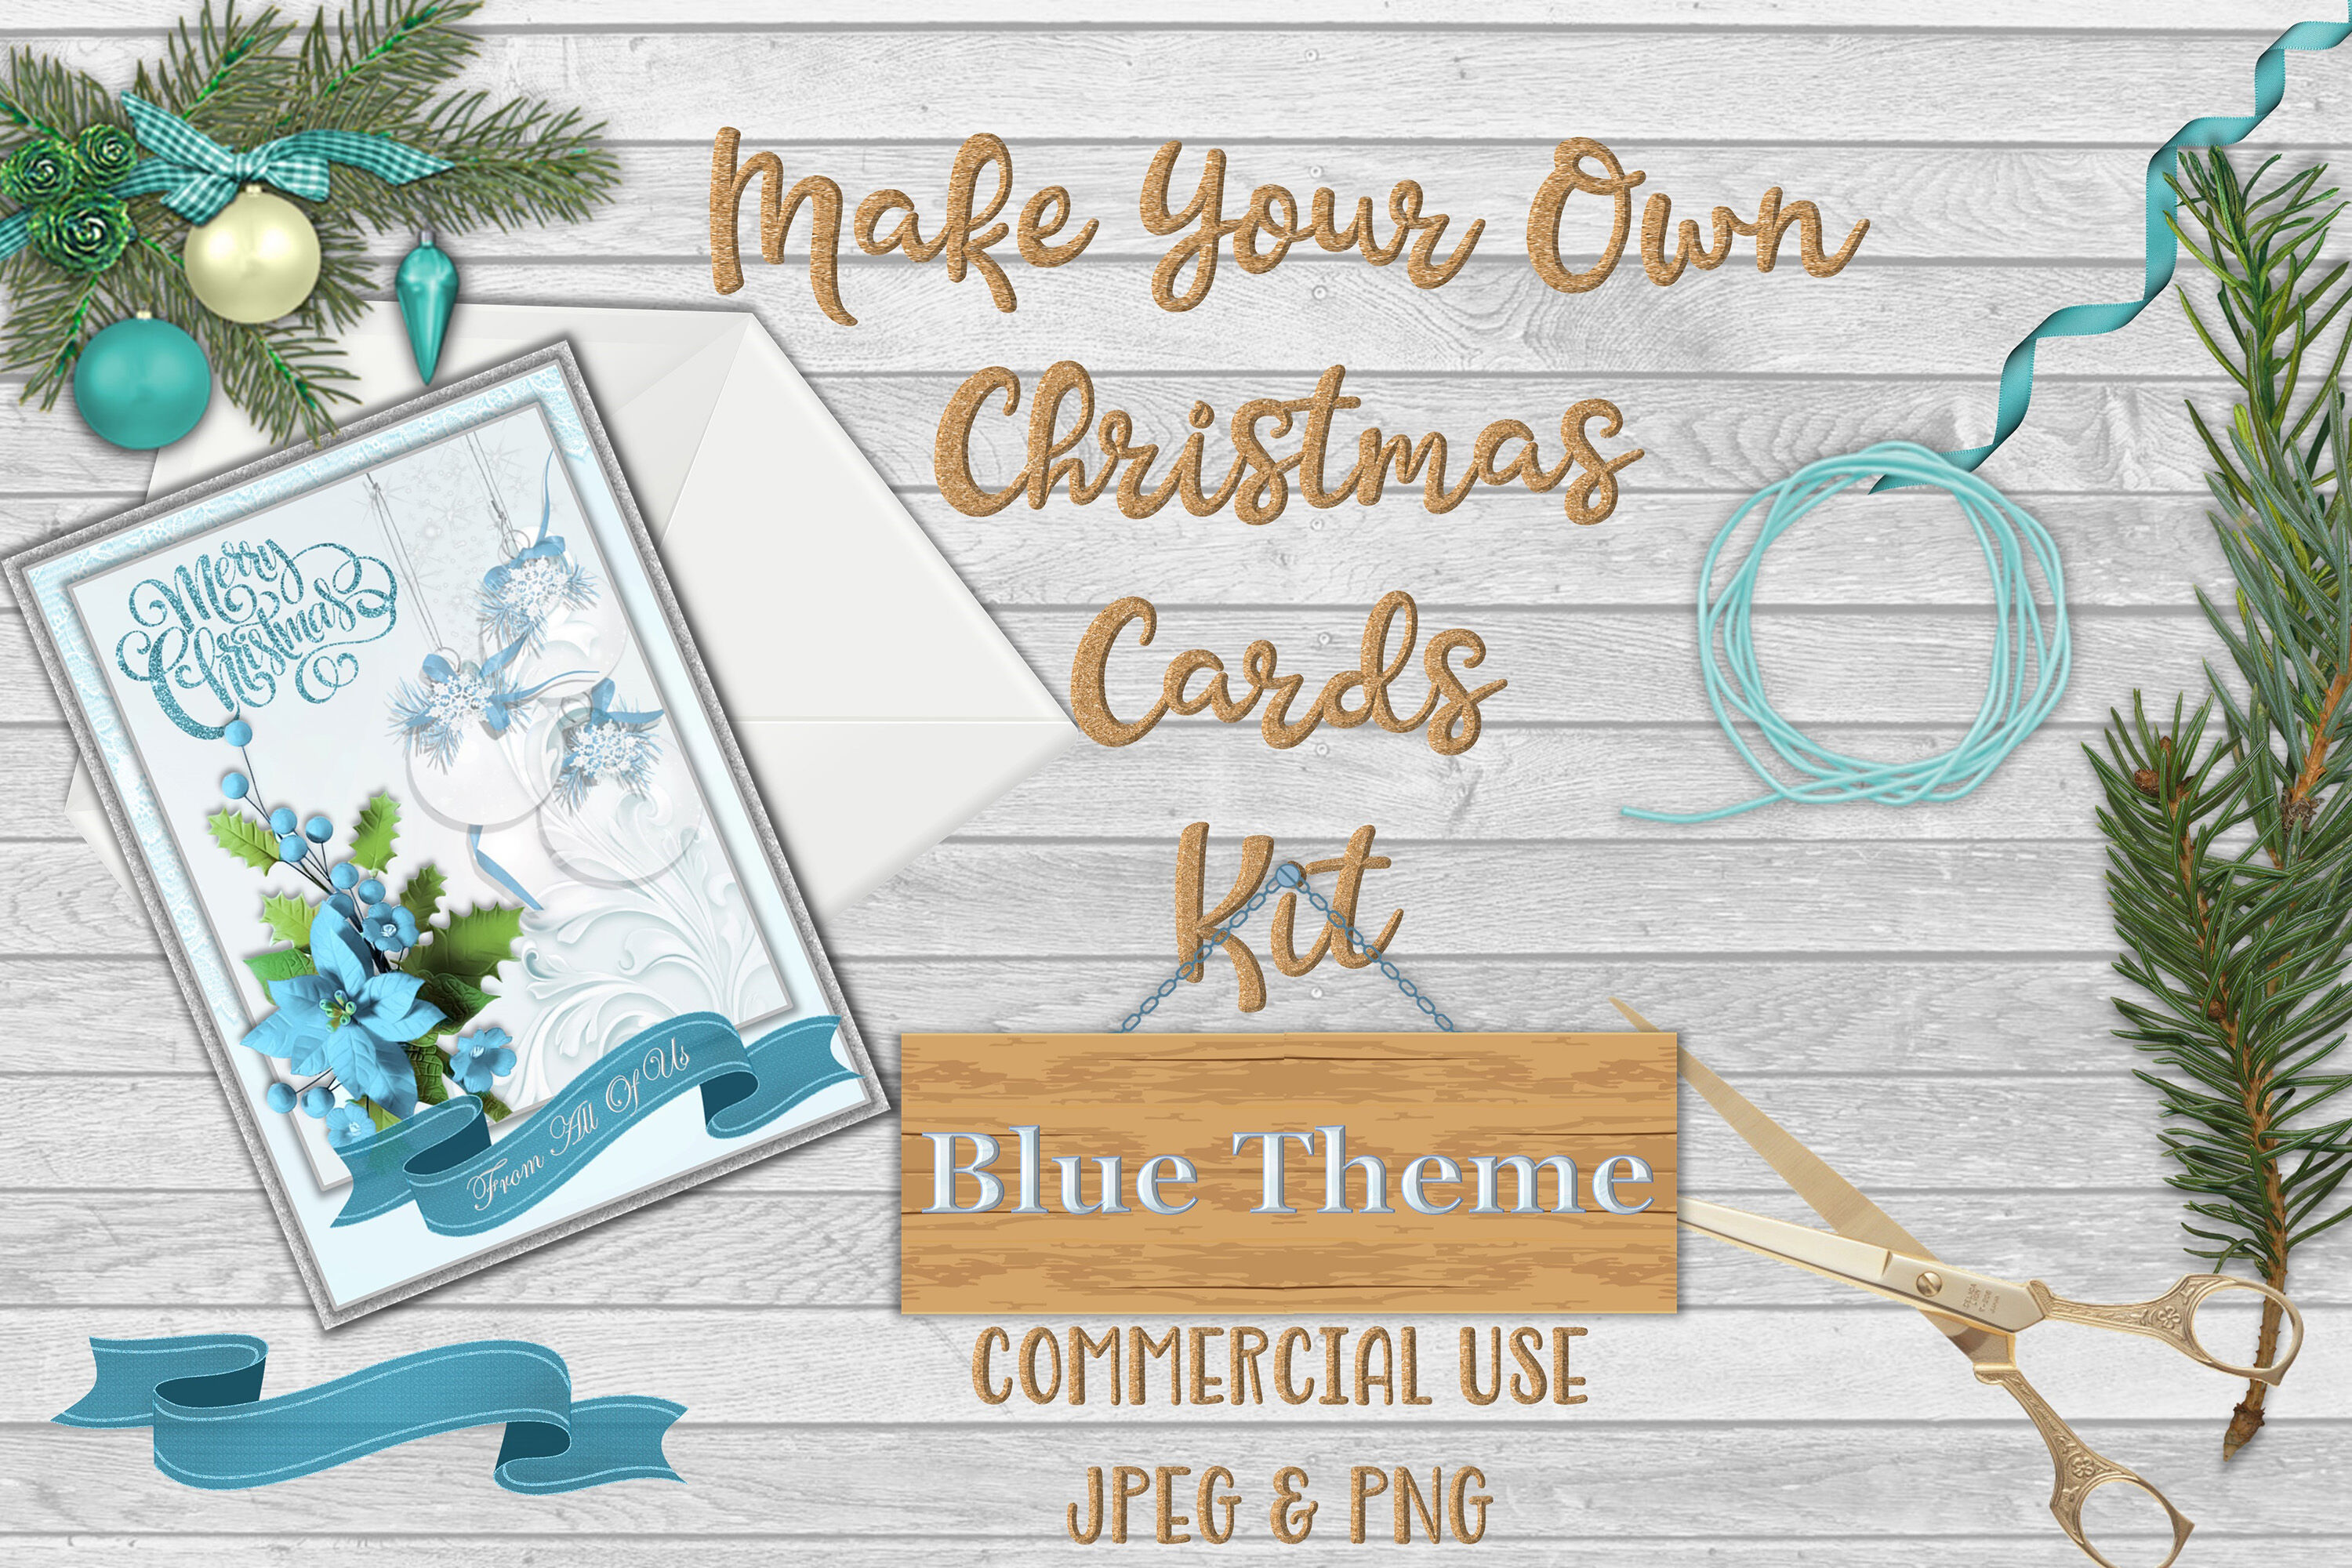 Christmas Card Making Kit Printable And With Free Clipart By The Paper 